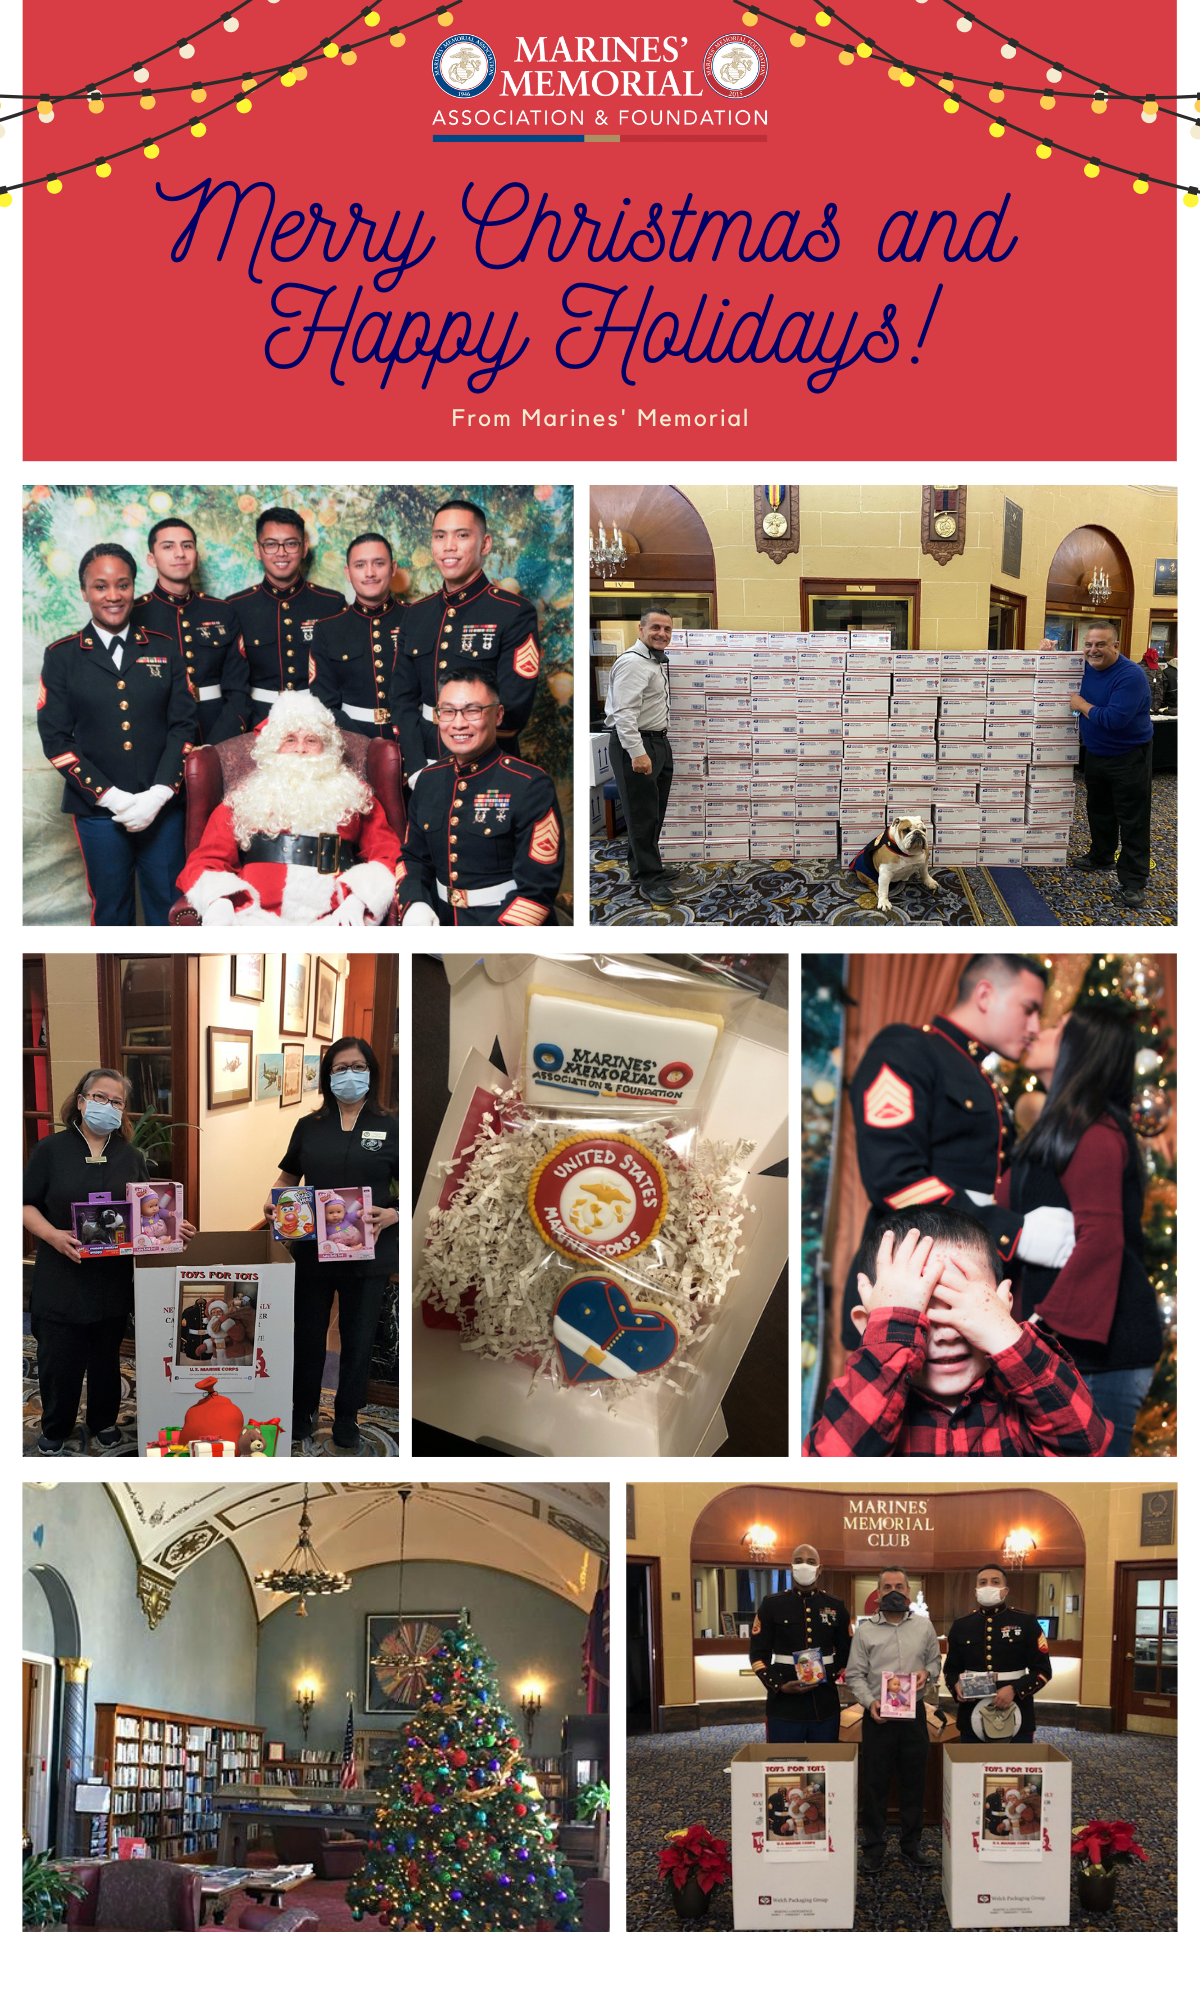 Merry Christmas and Happy Holidays from Marines' Memorial!